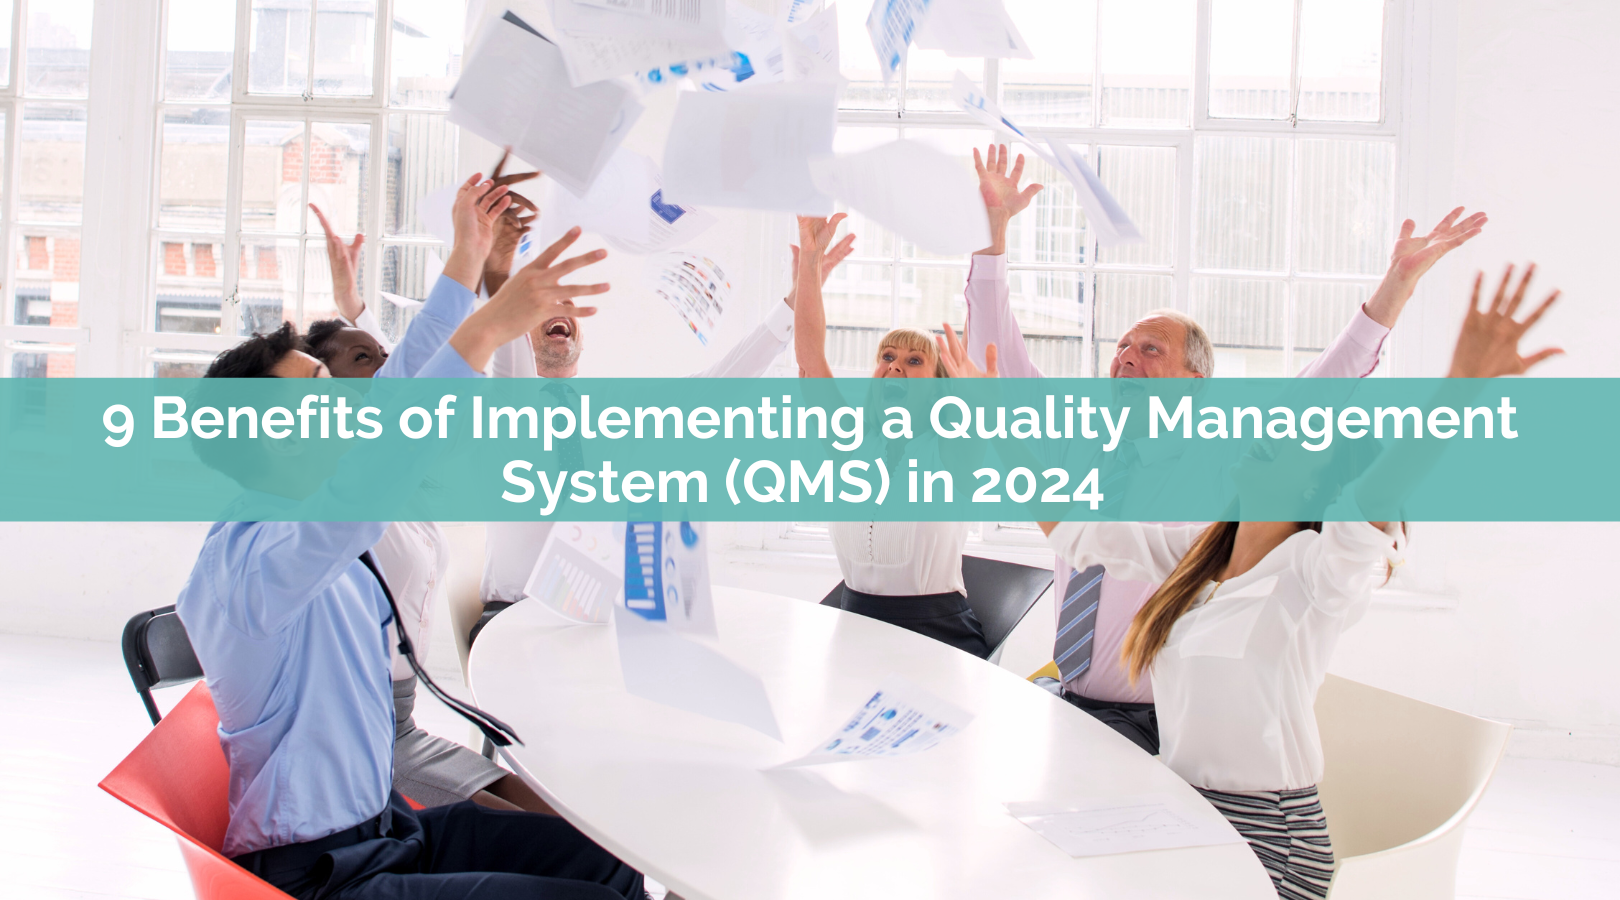 9 Benefits of Implementing a Quality Management System (QMS) in 2024